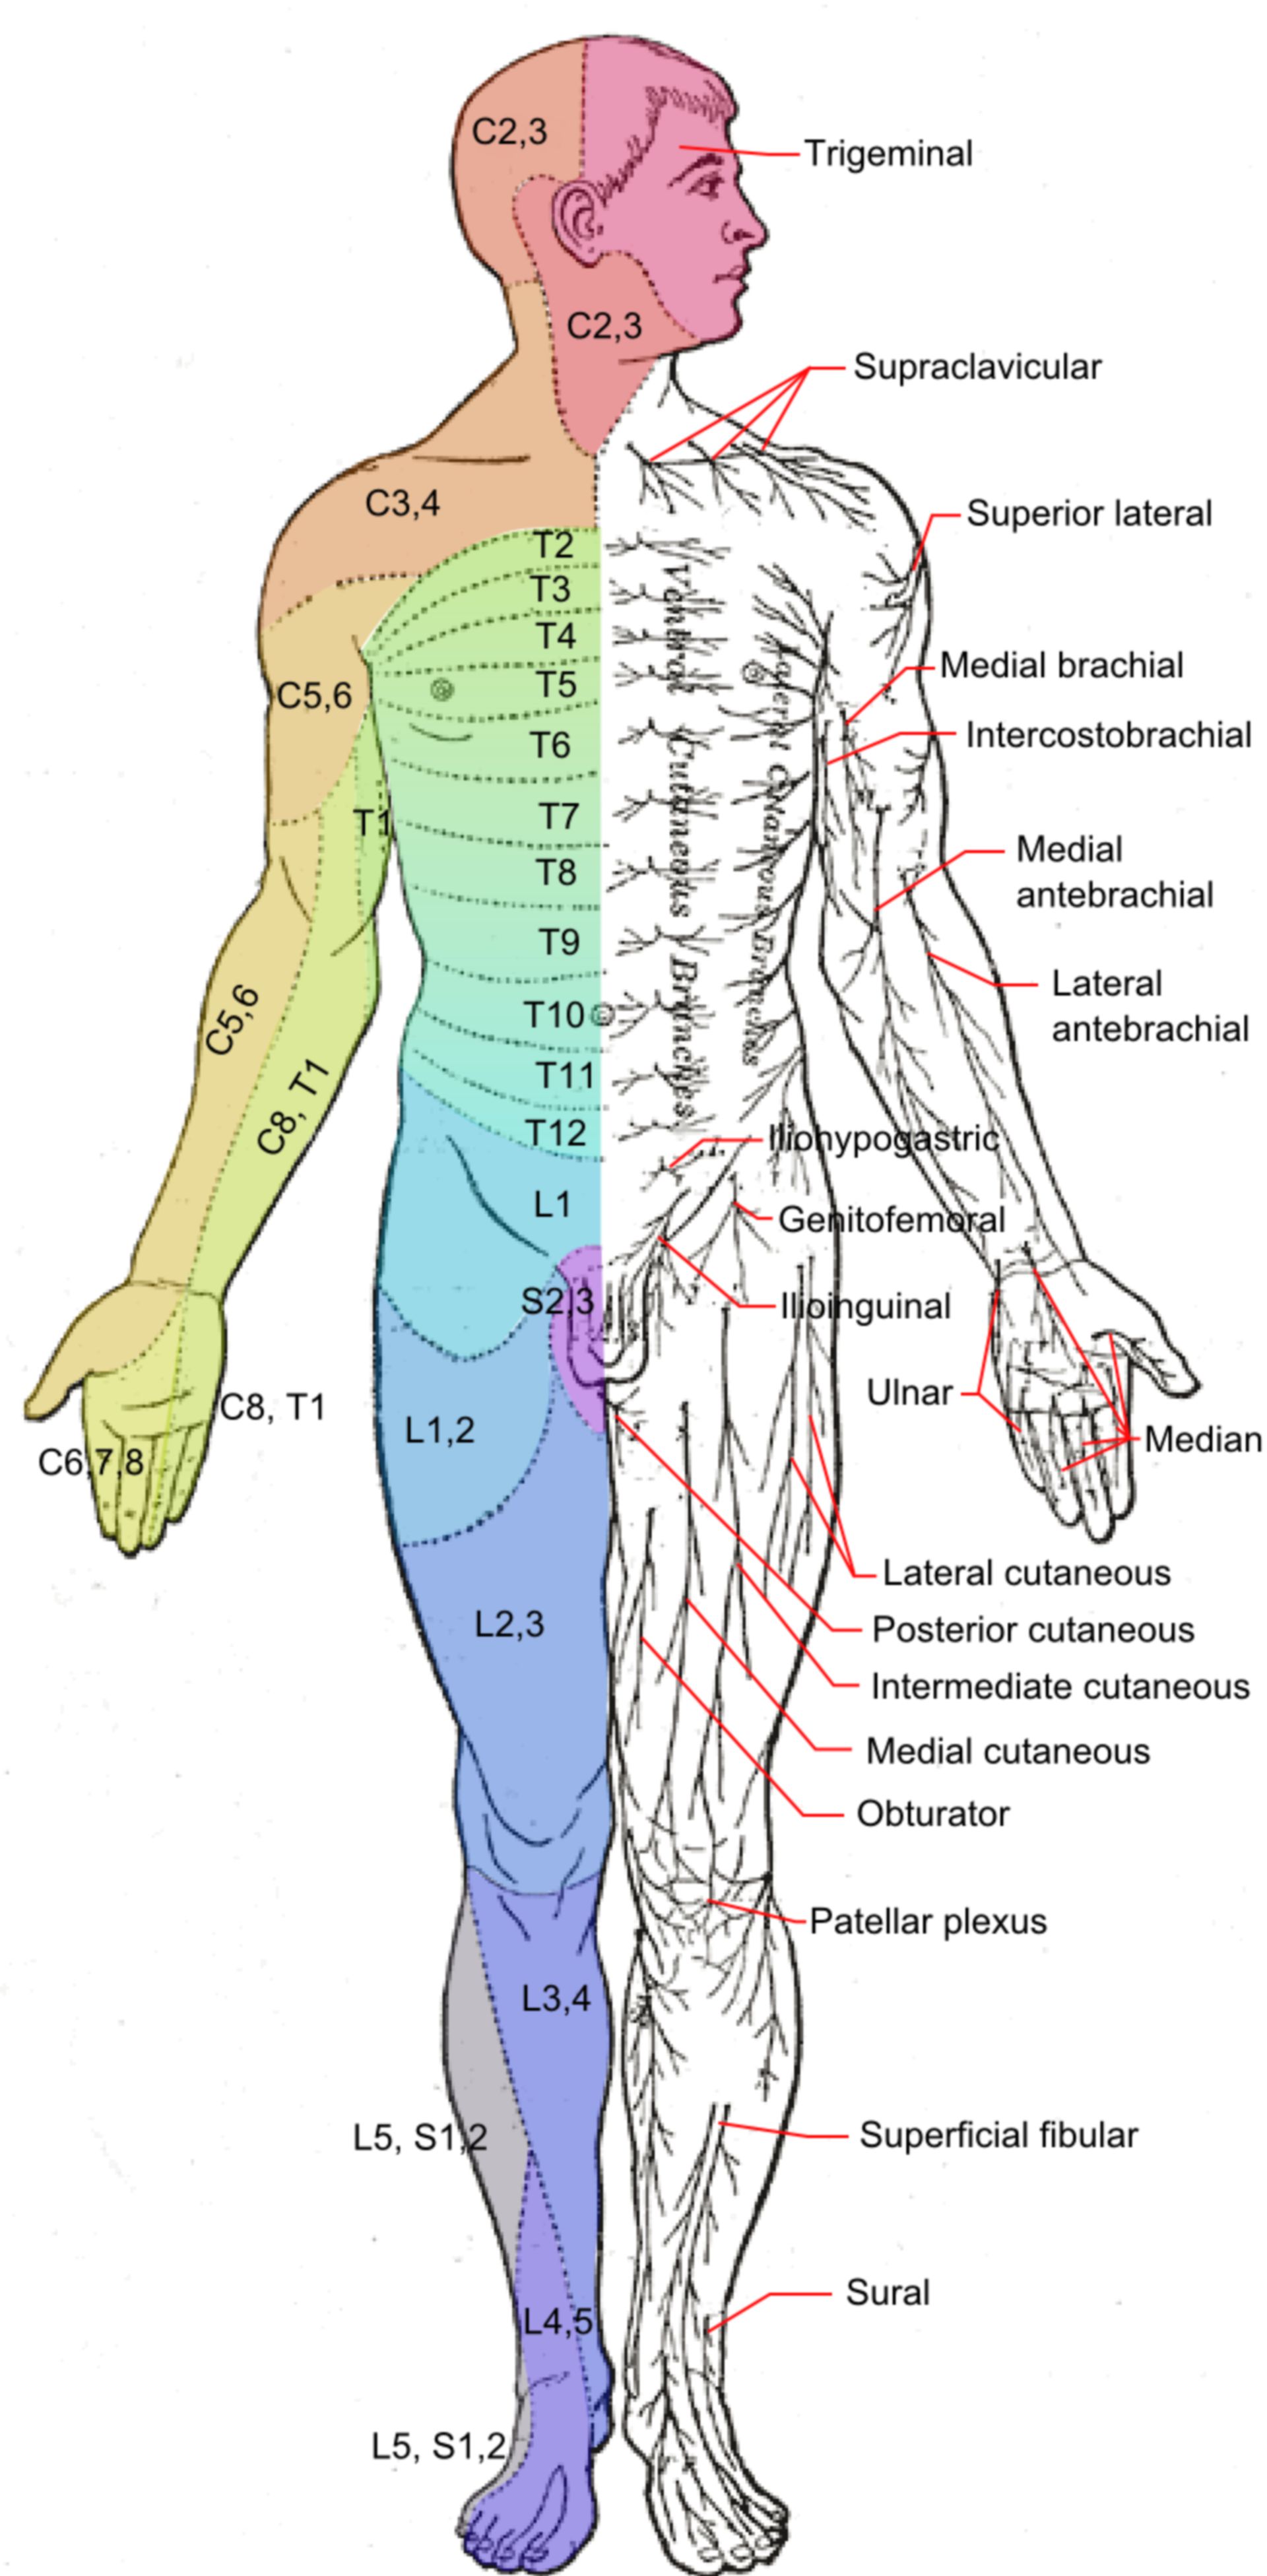 Dermatomes_and_cutaneous_nerves_-_anterior